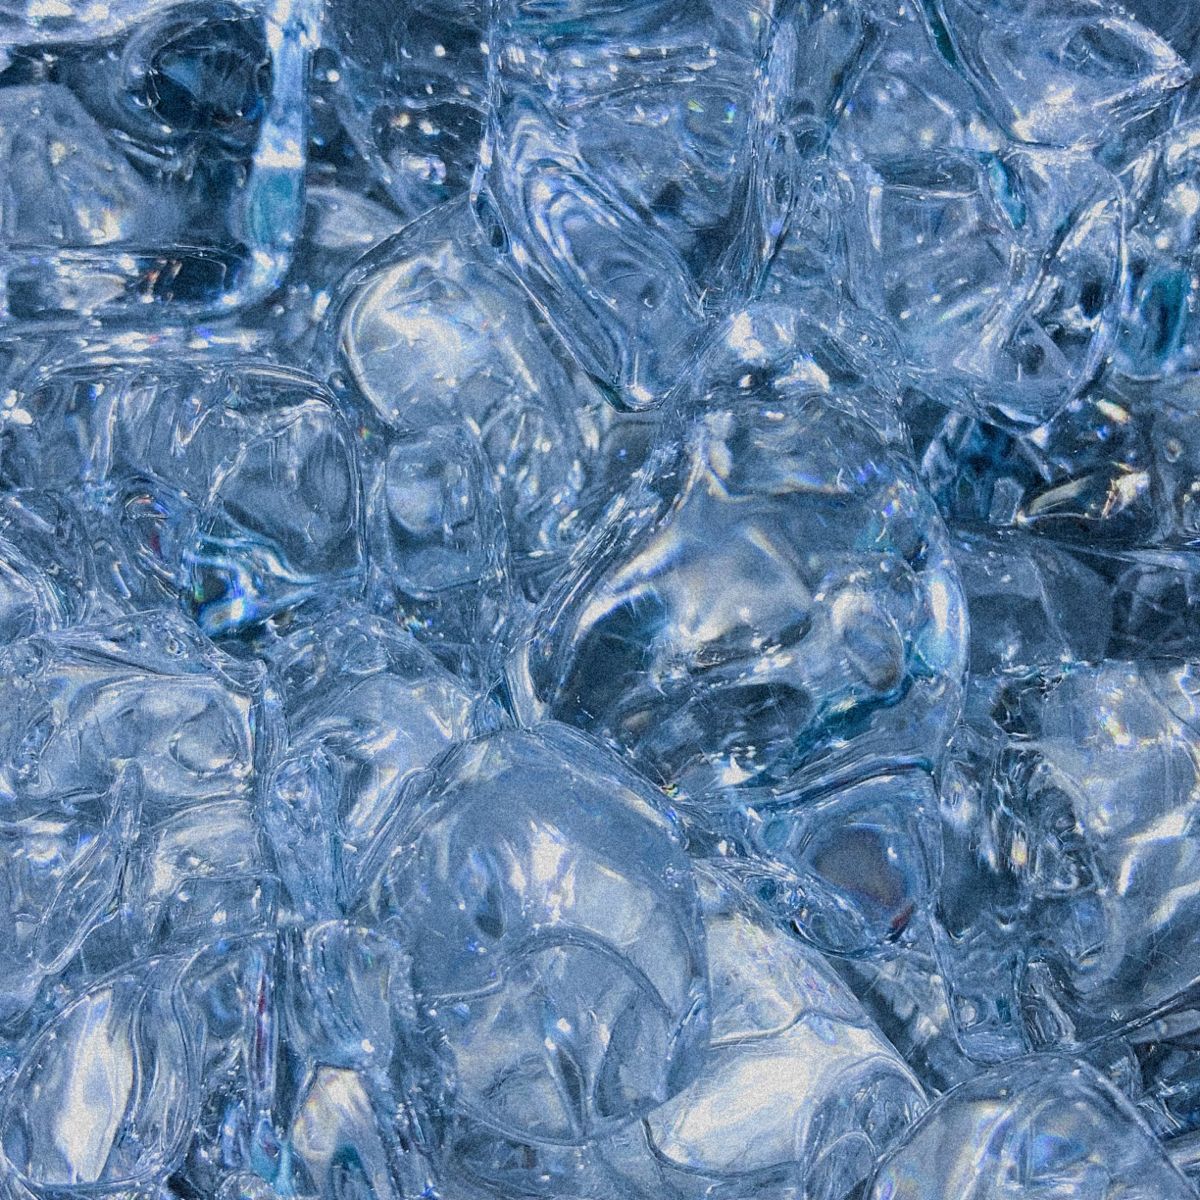 A close up of ice cubes in water - Ice